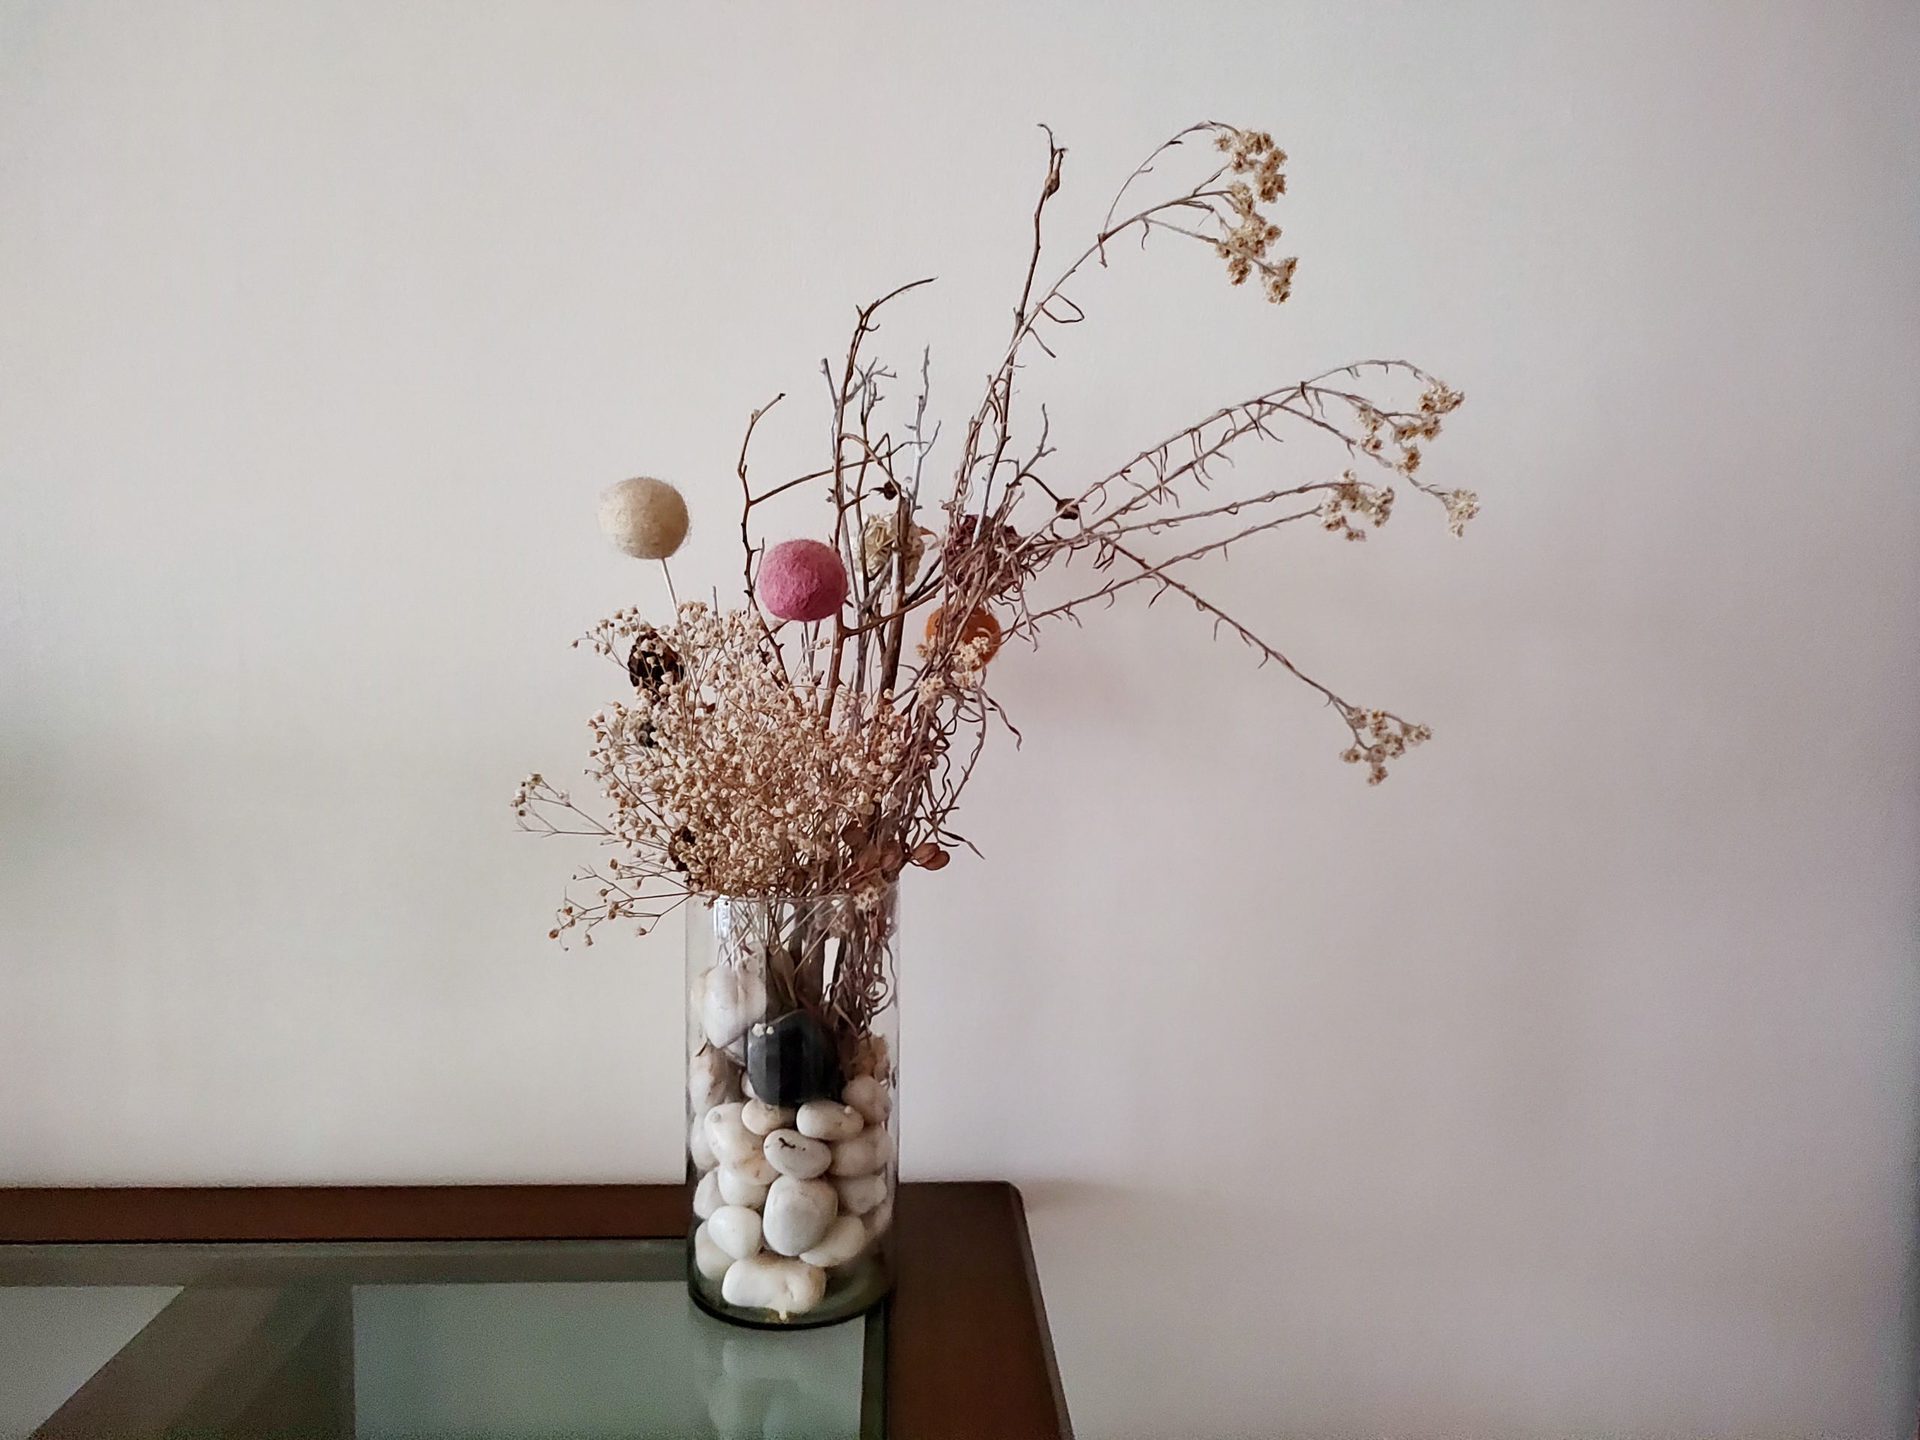 Moto Edge 20 Pro indoor night mode shot of dried flowers in a vase on a table